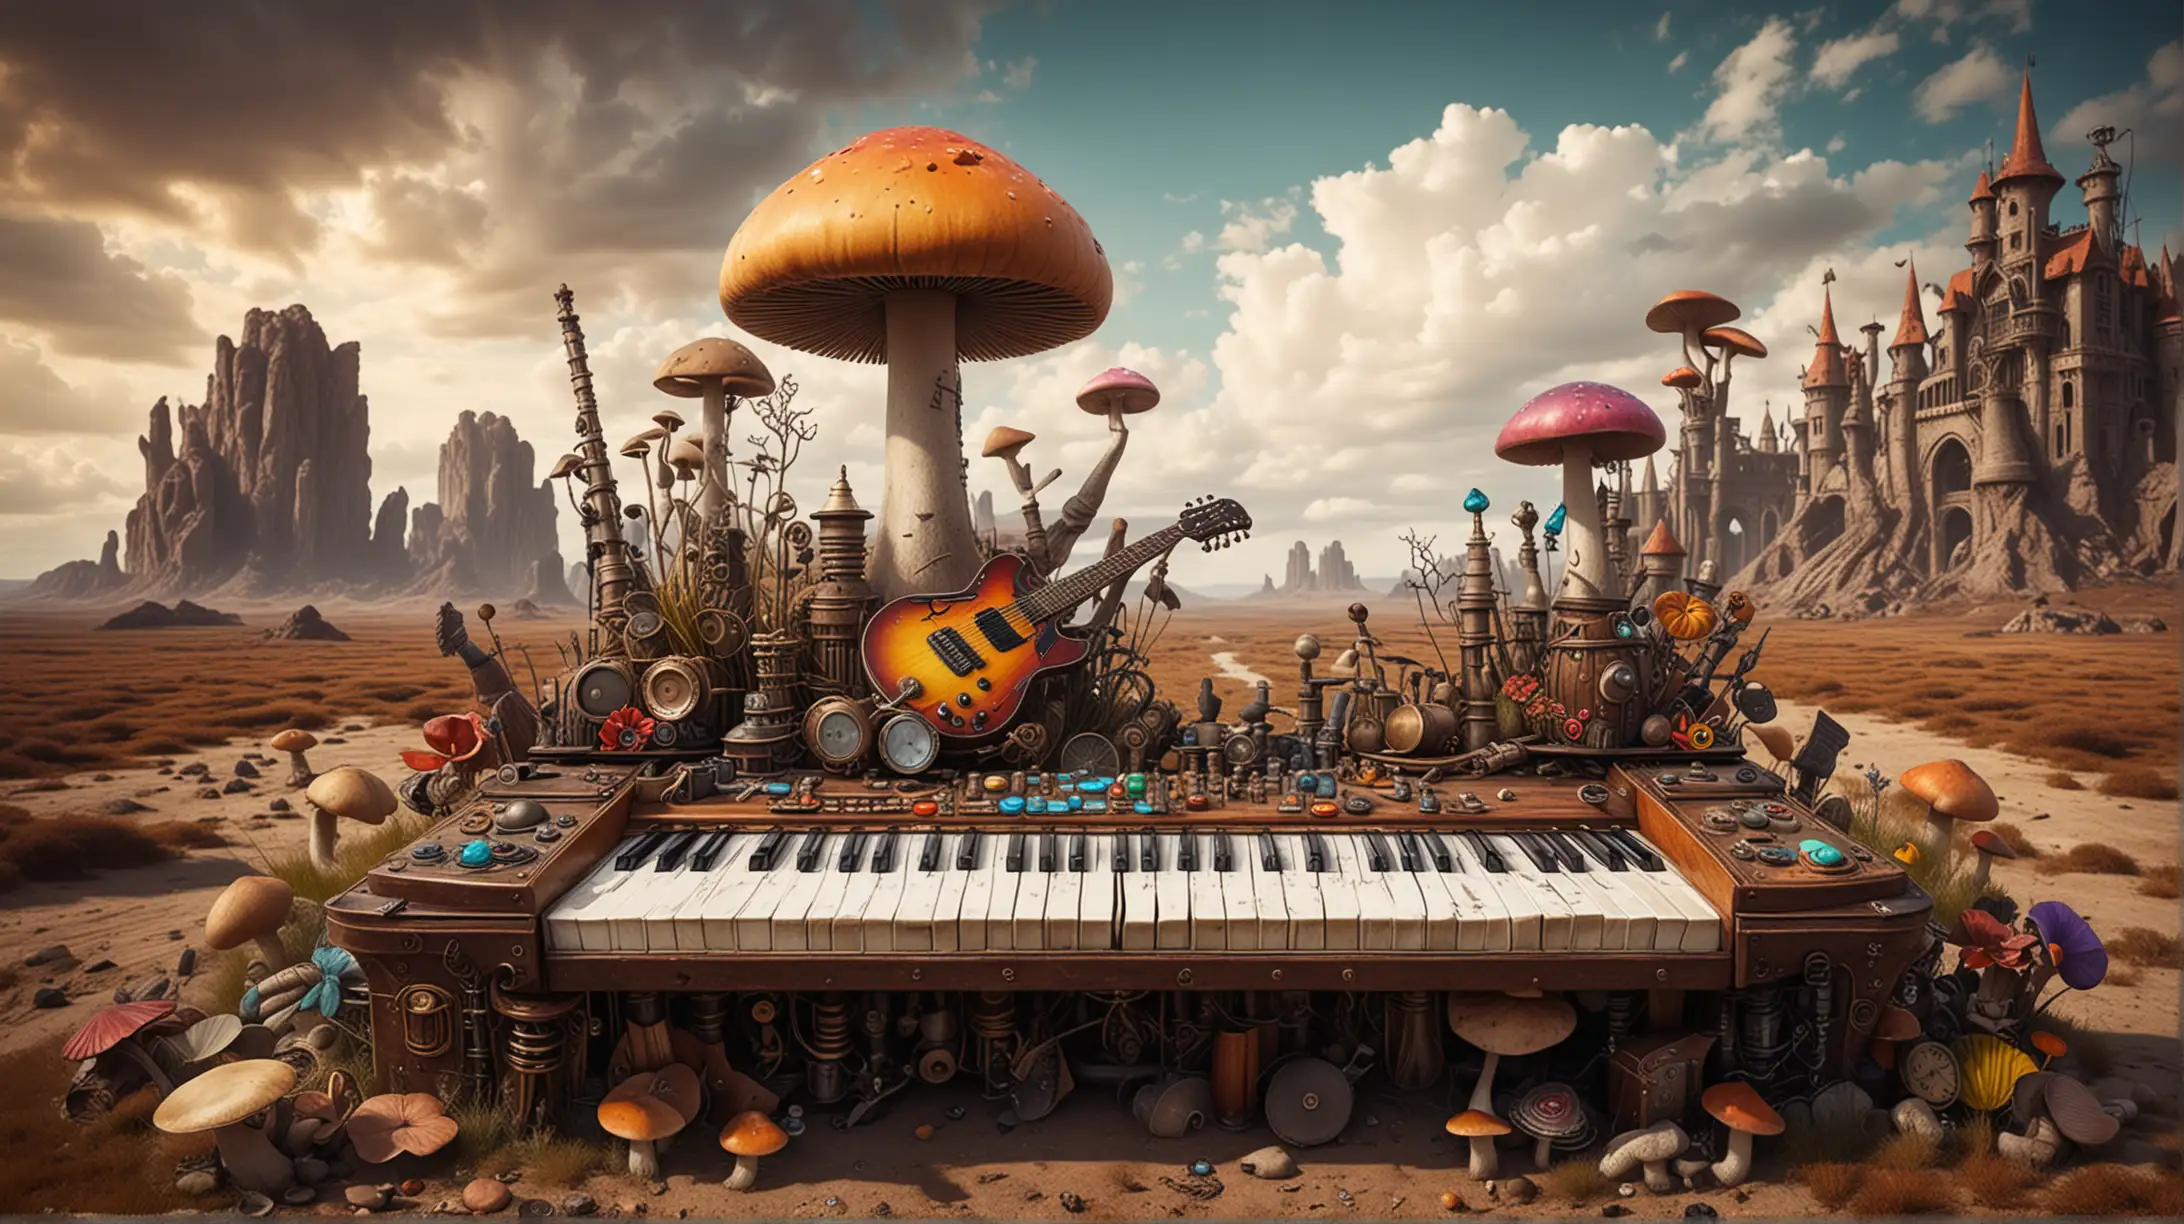 Vibrant Steampunk Gothic Landscape with Musical Instruments